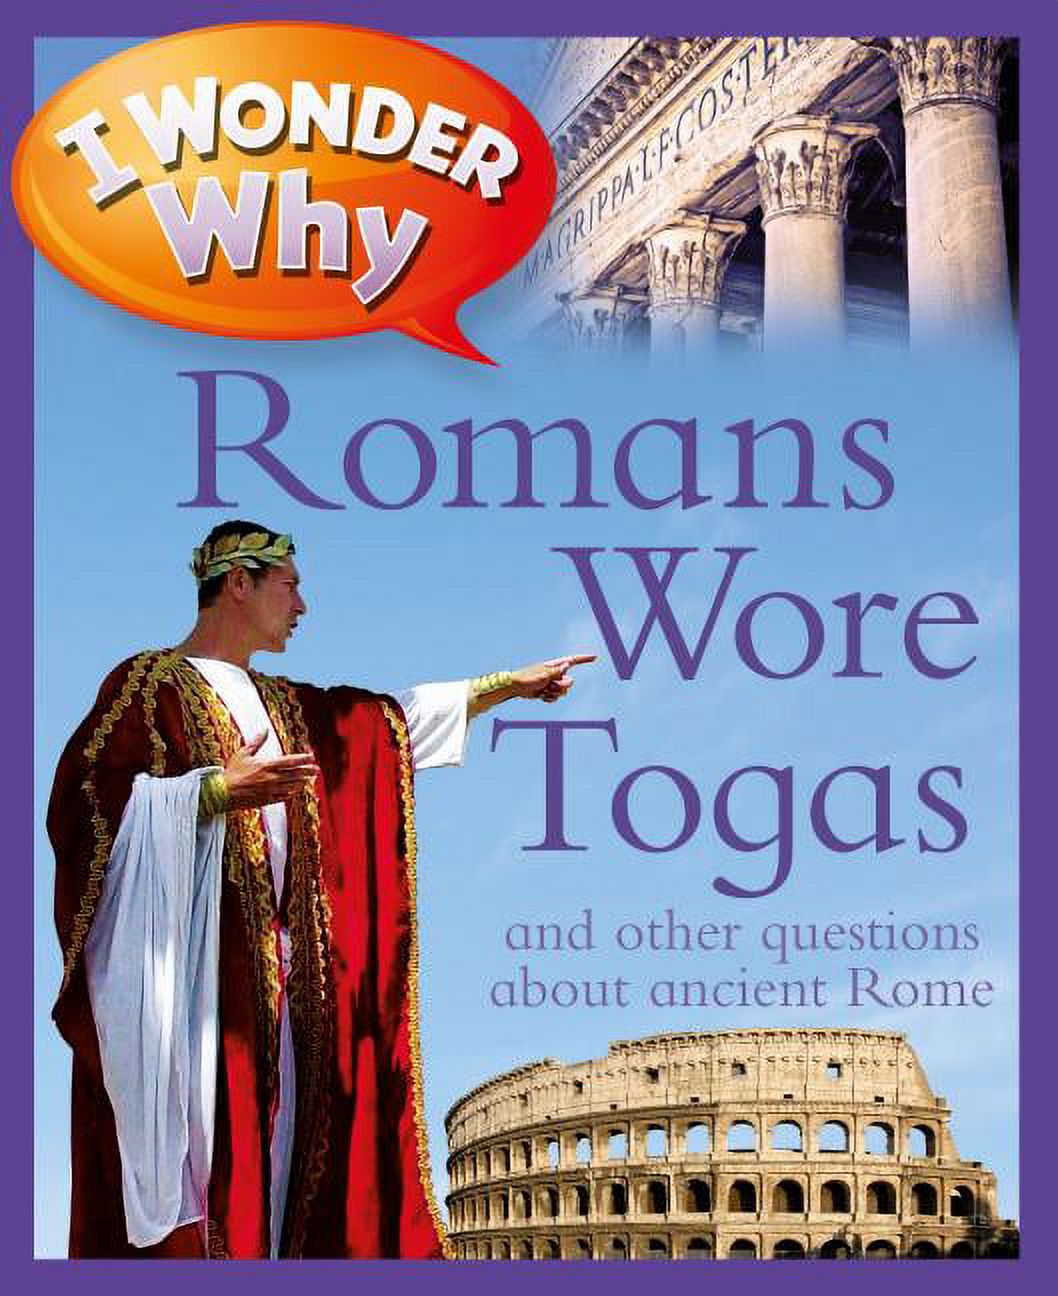 I Wonder Why: I Wonder Why Romans Wore Togas : And Other Questions about Rome (Paperback) - image 1 of 1